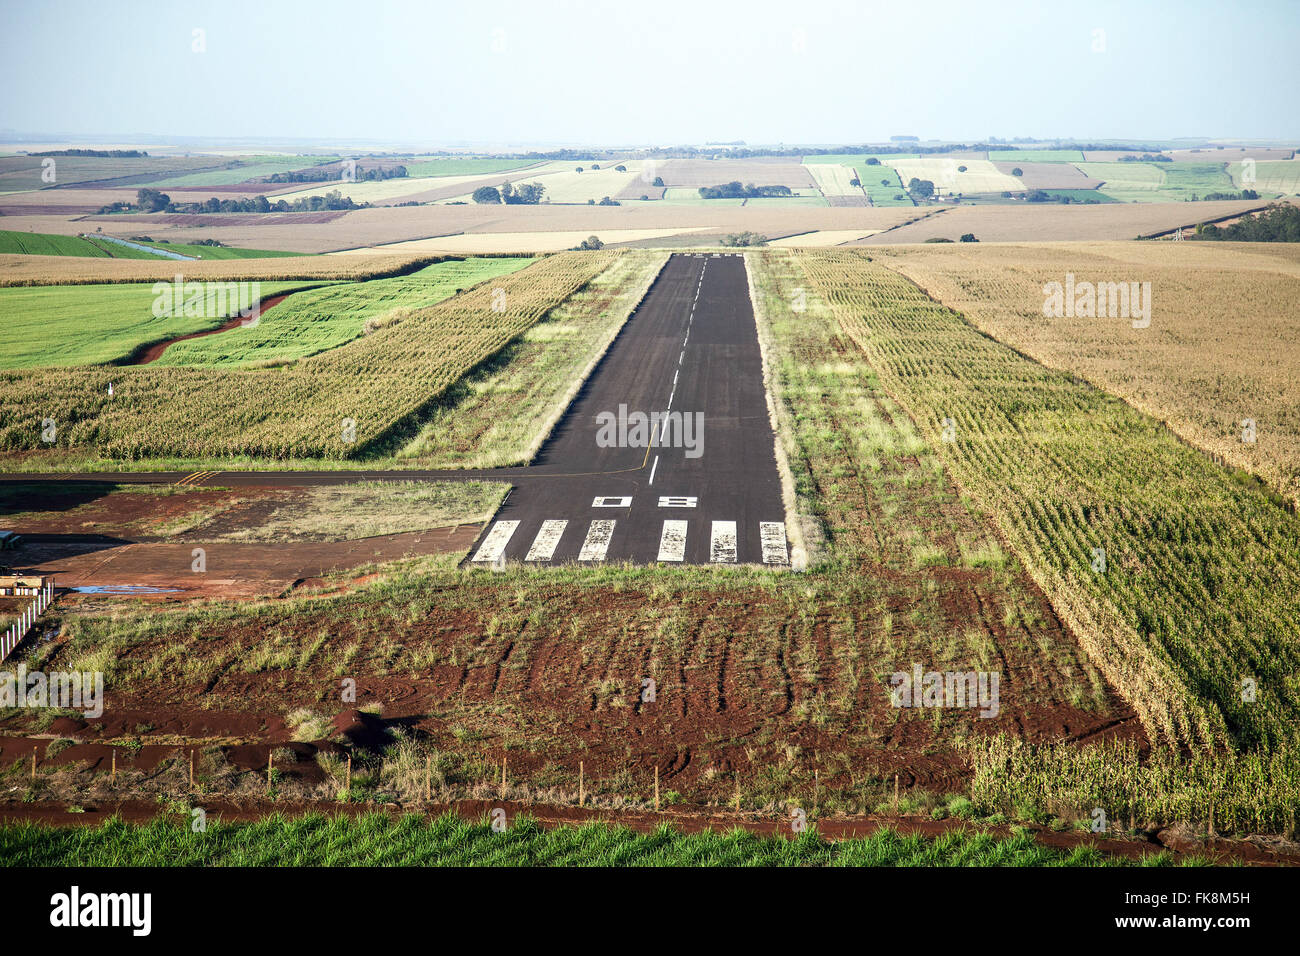 Aerial view of small track through the plantations of sugarcane and grains airport in rural Stock Photo